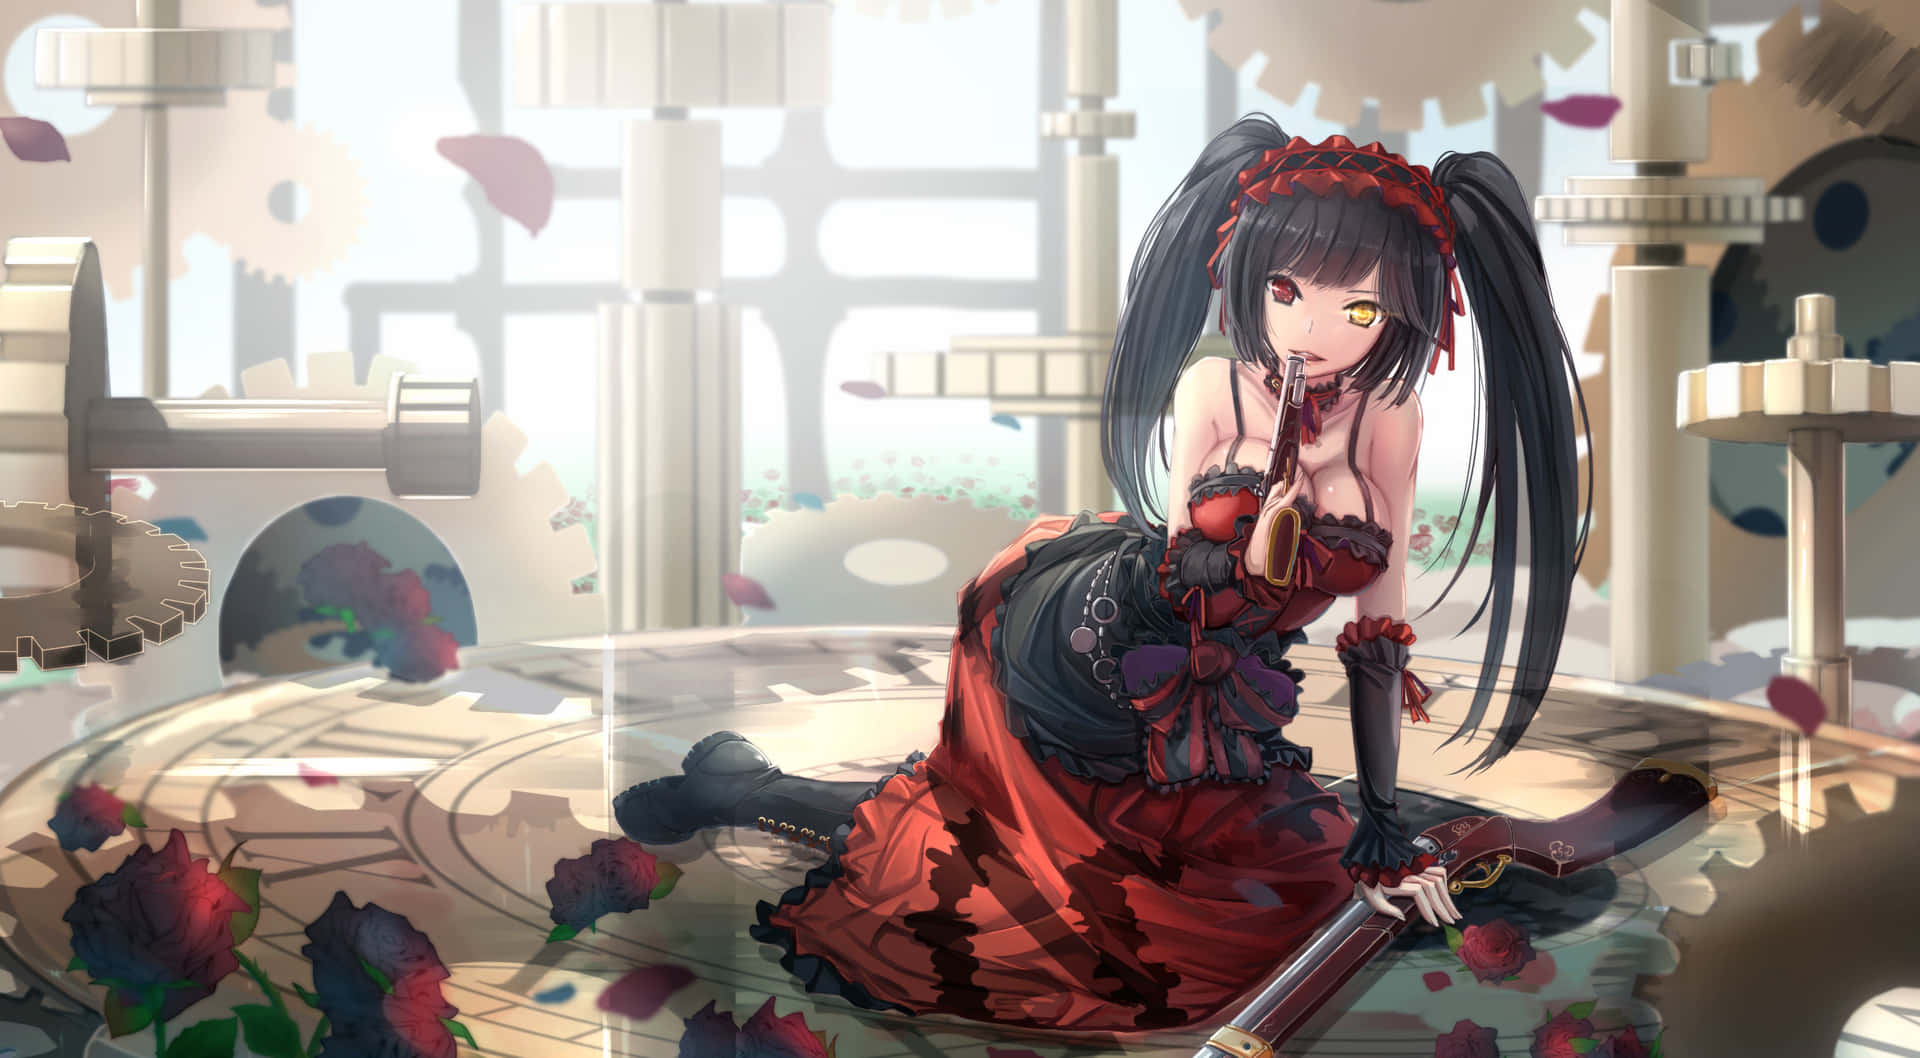 "Plunge into the world of Date A Live with an amazing cast of characters!" Wallpaper